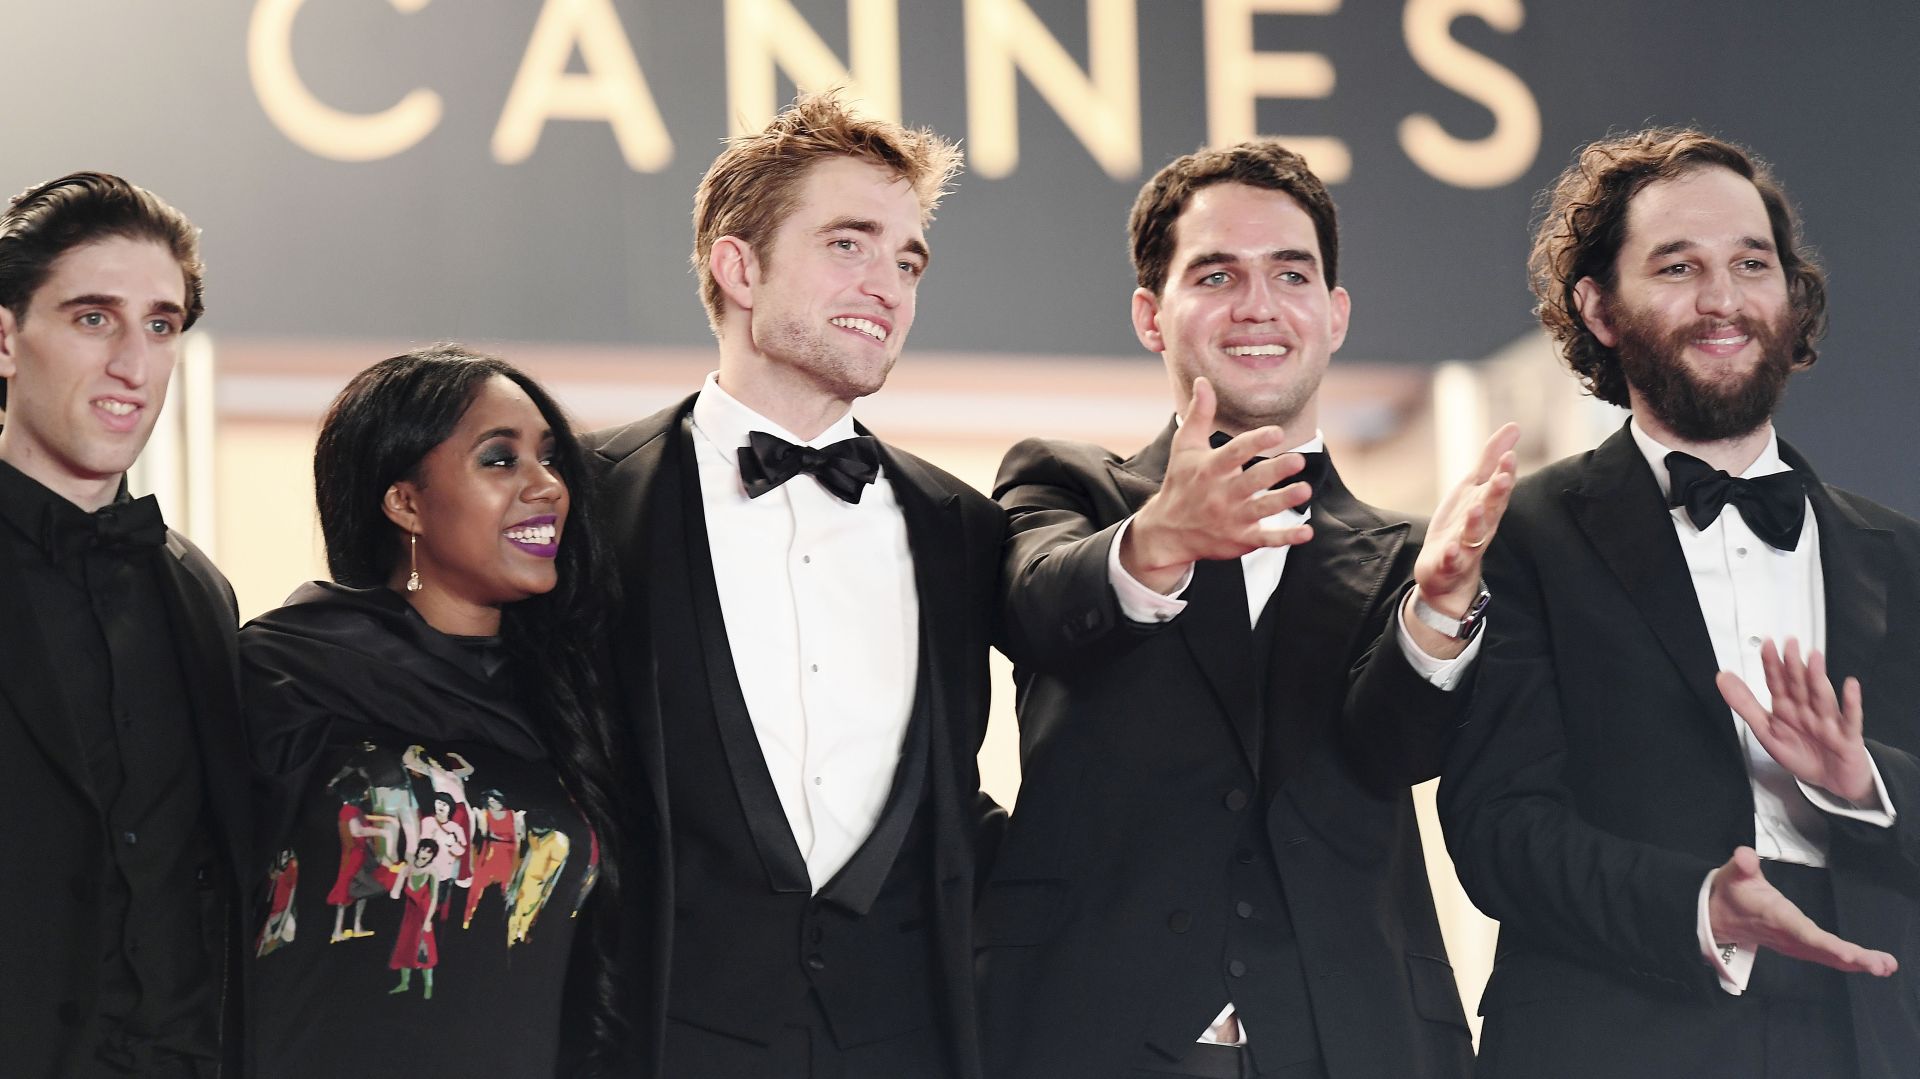 CANNES, FRANCE - MAY 25:  (L-R) Buddy Duress, Taliah Webster, Robert Pattinson, Benny Safdie and Josh Safdie attend the "Good Time" screening during the 70th annual Cannes Film Festival at Palais des Festivals on May 25, 2017 in Cannes, France.  (Photo by Matthias Nareyek/Getty Images)